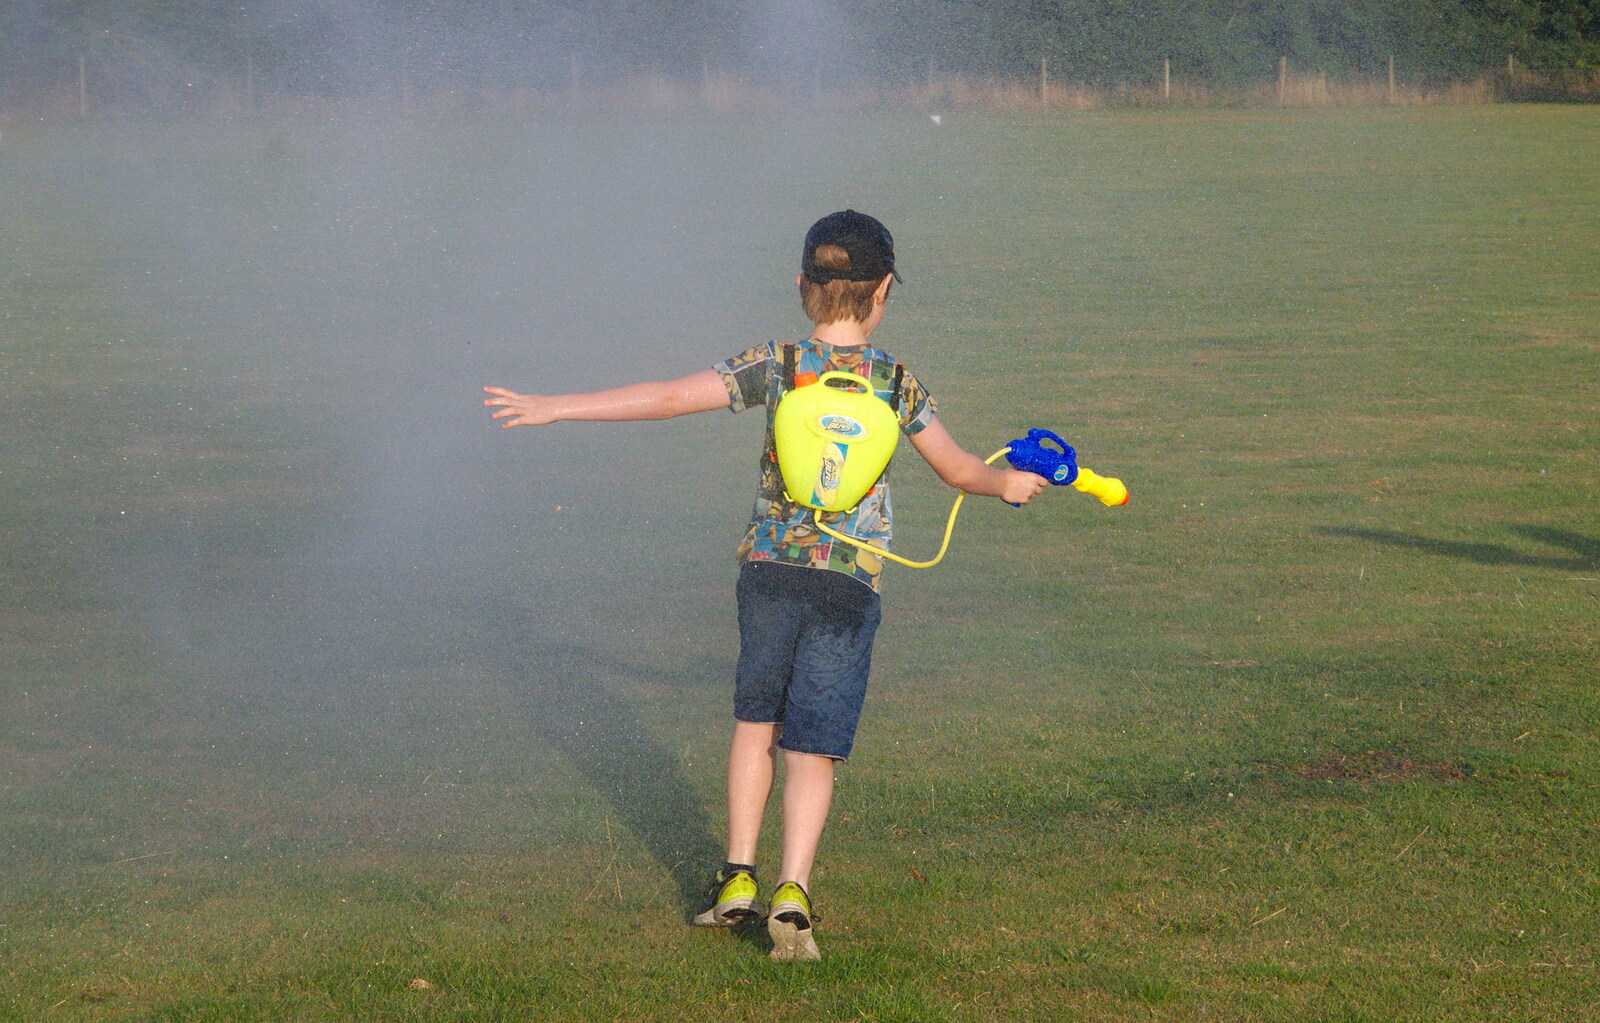 There's a wall of spray from A Water Fight with a Fire Engine, Eye Cricket Club, Suffolk - 5th August 2019